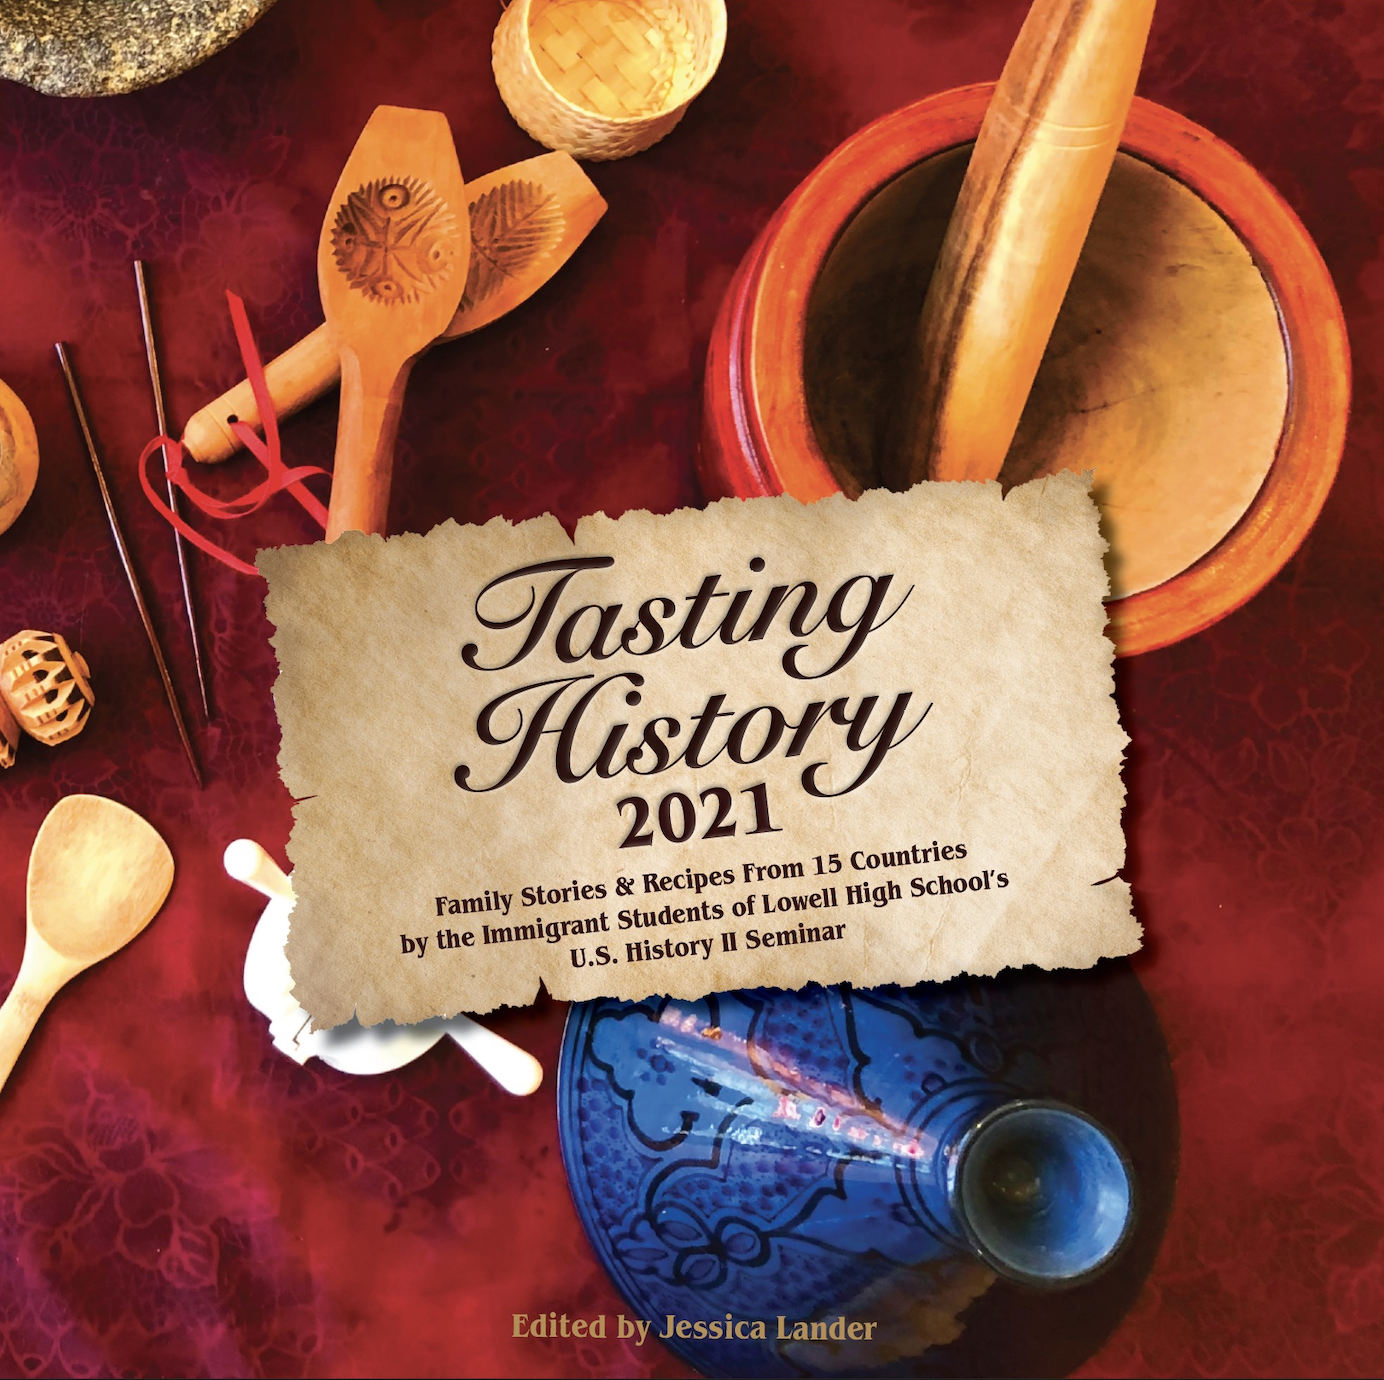 The cookbook from the 2020-’21 class has more than 60 recipes from 17 countries, edited by their history teacher, Jessica Lander.